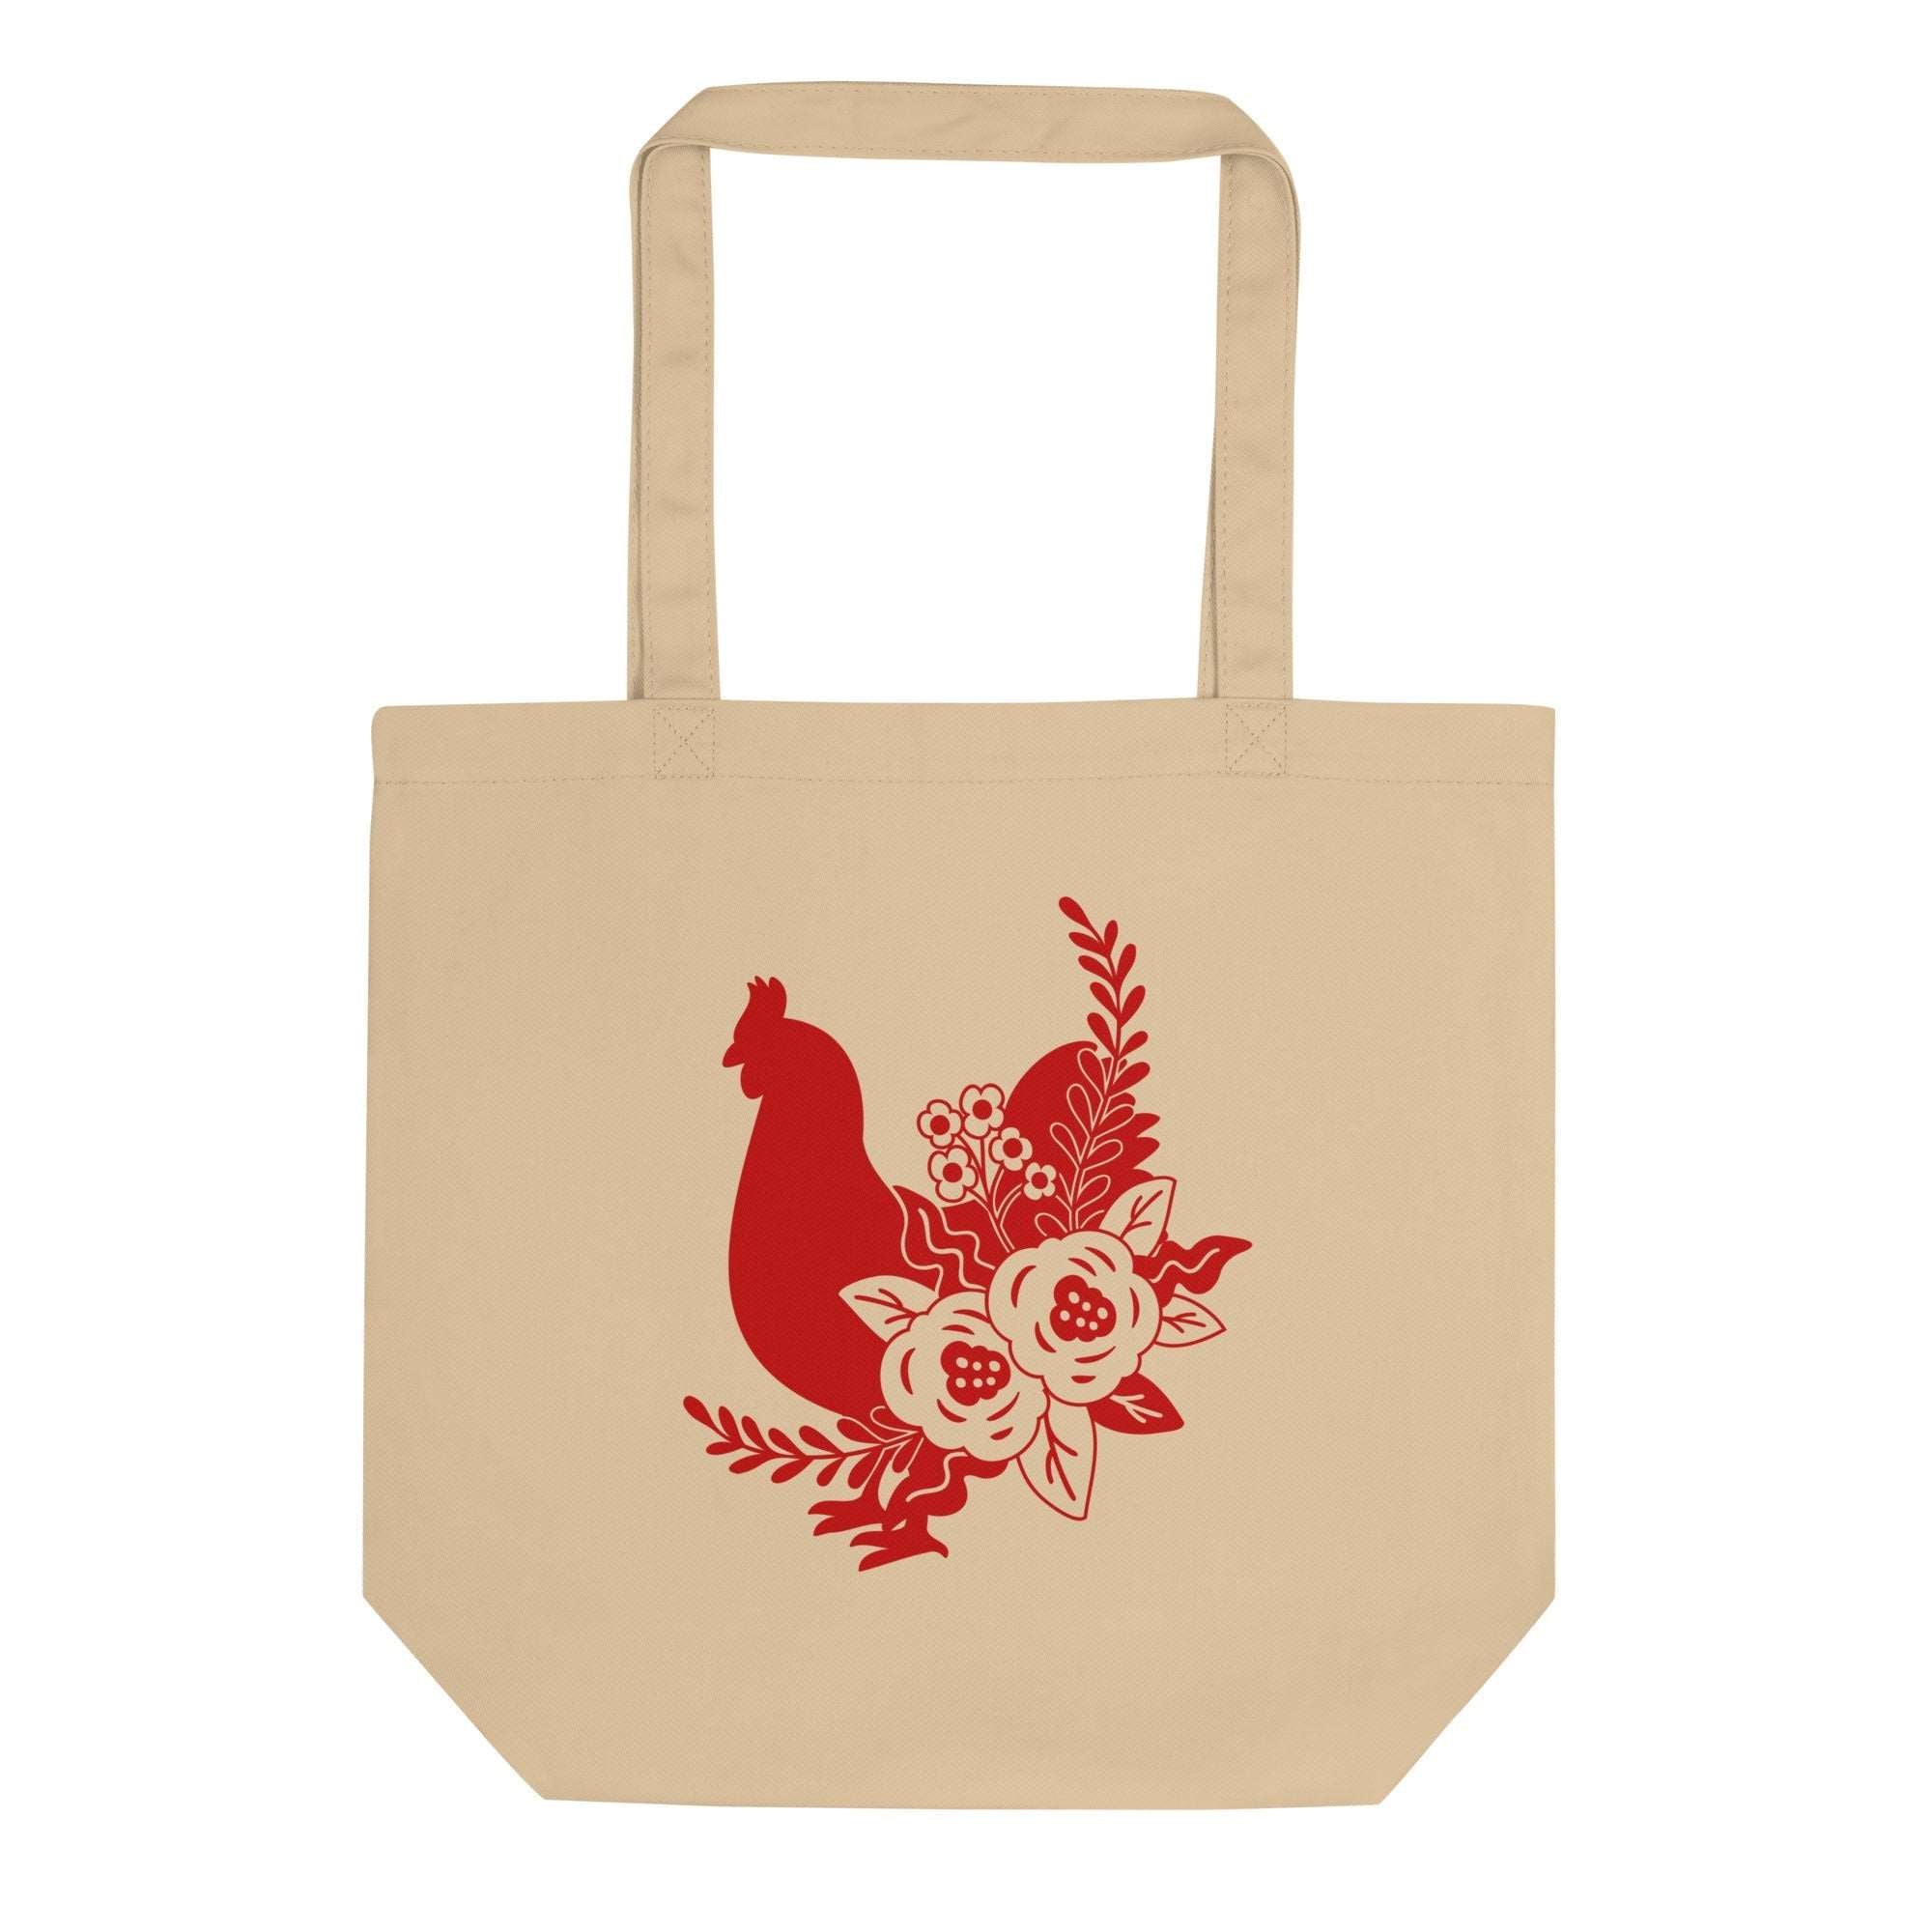 Floral Chicken Eco Tote Bag - Cluck It All Farms